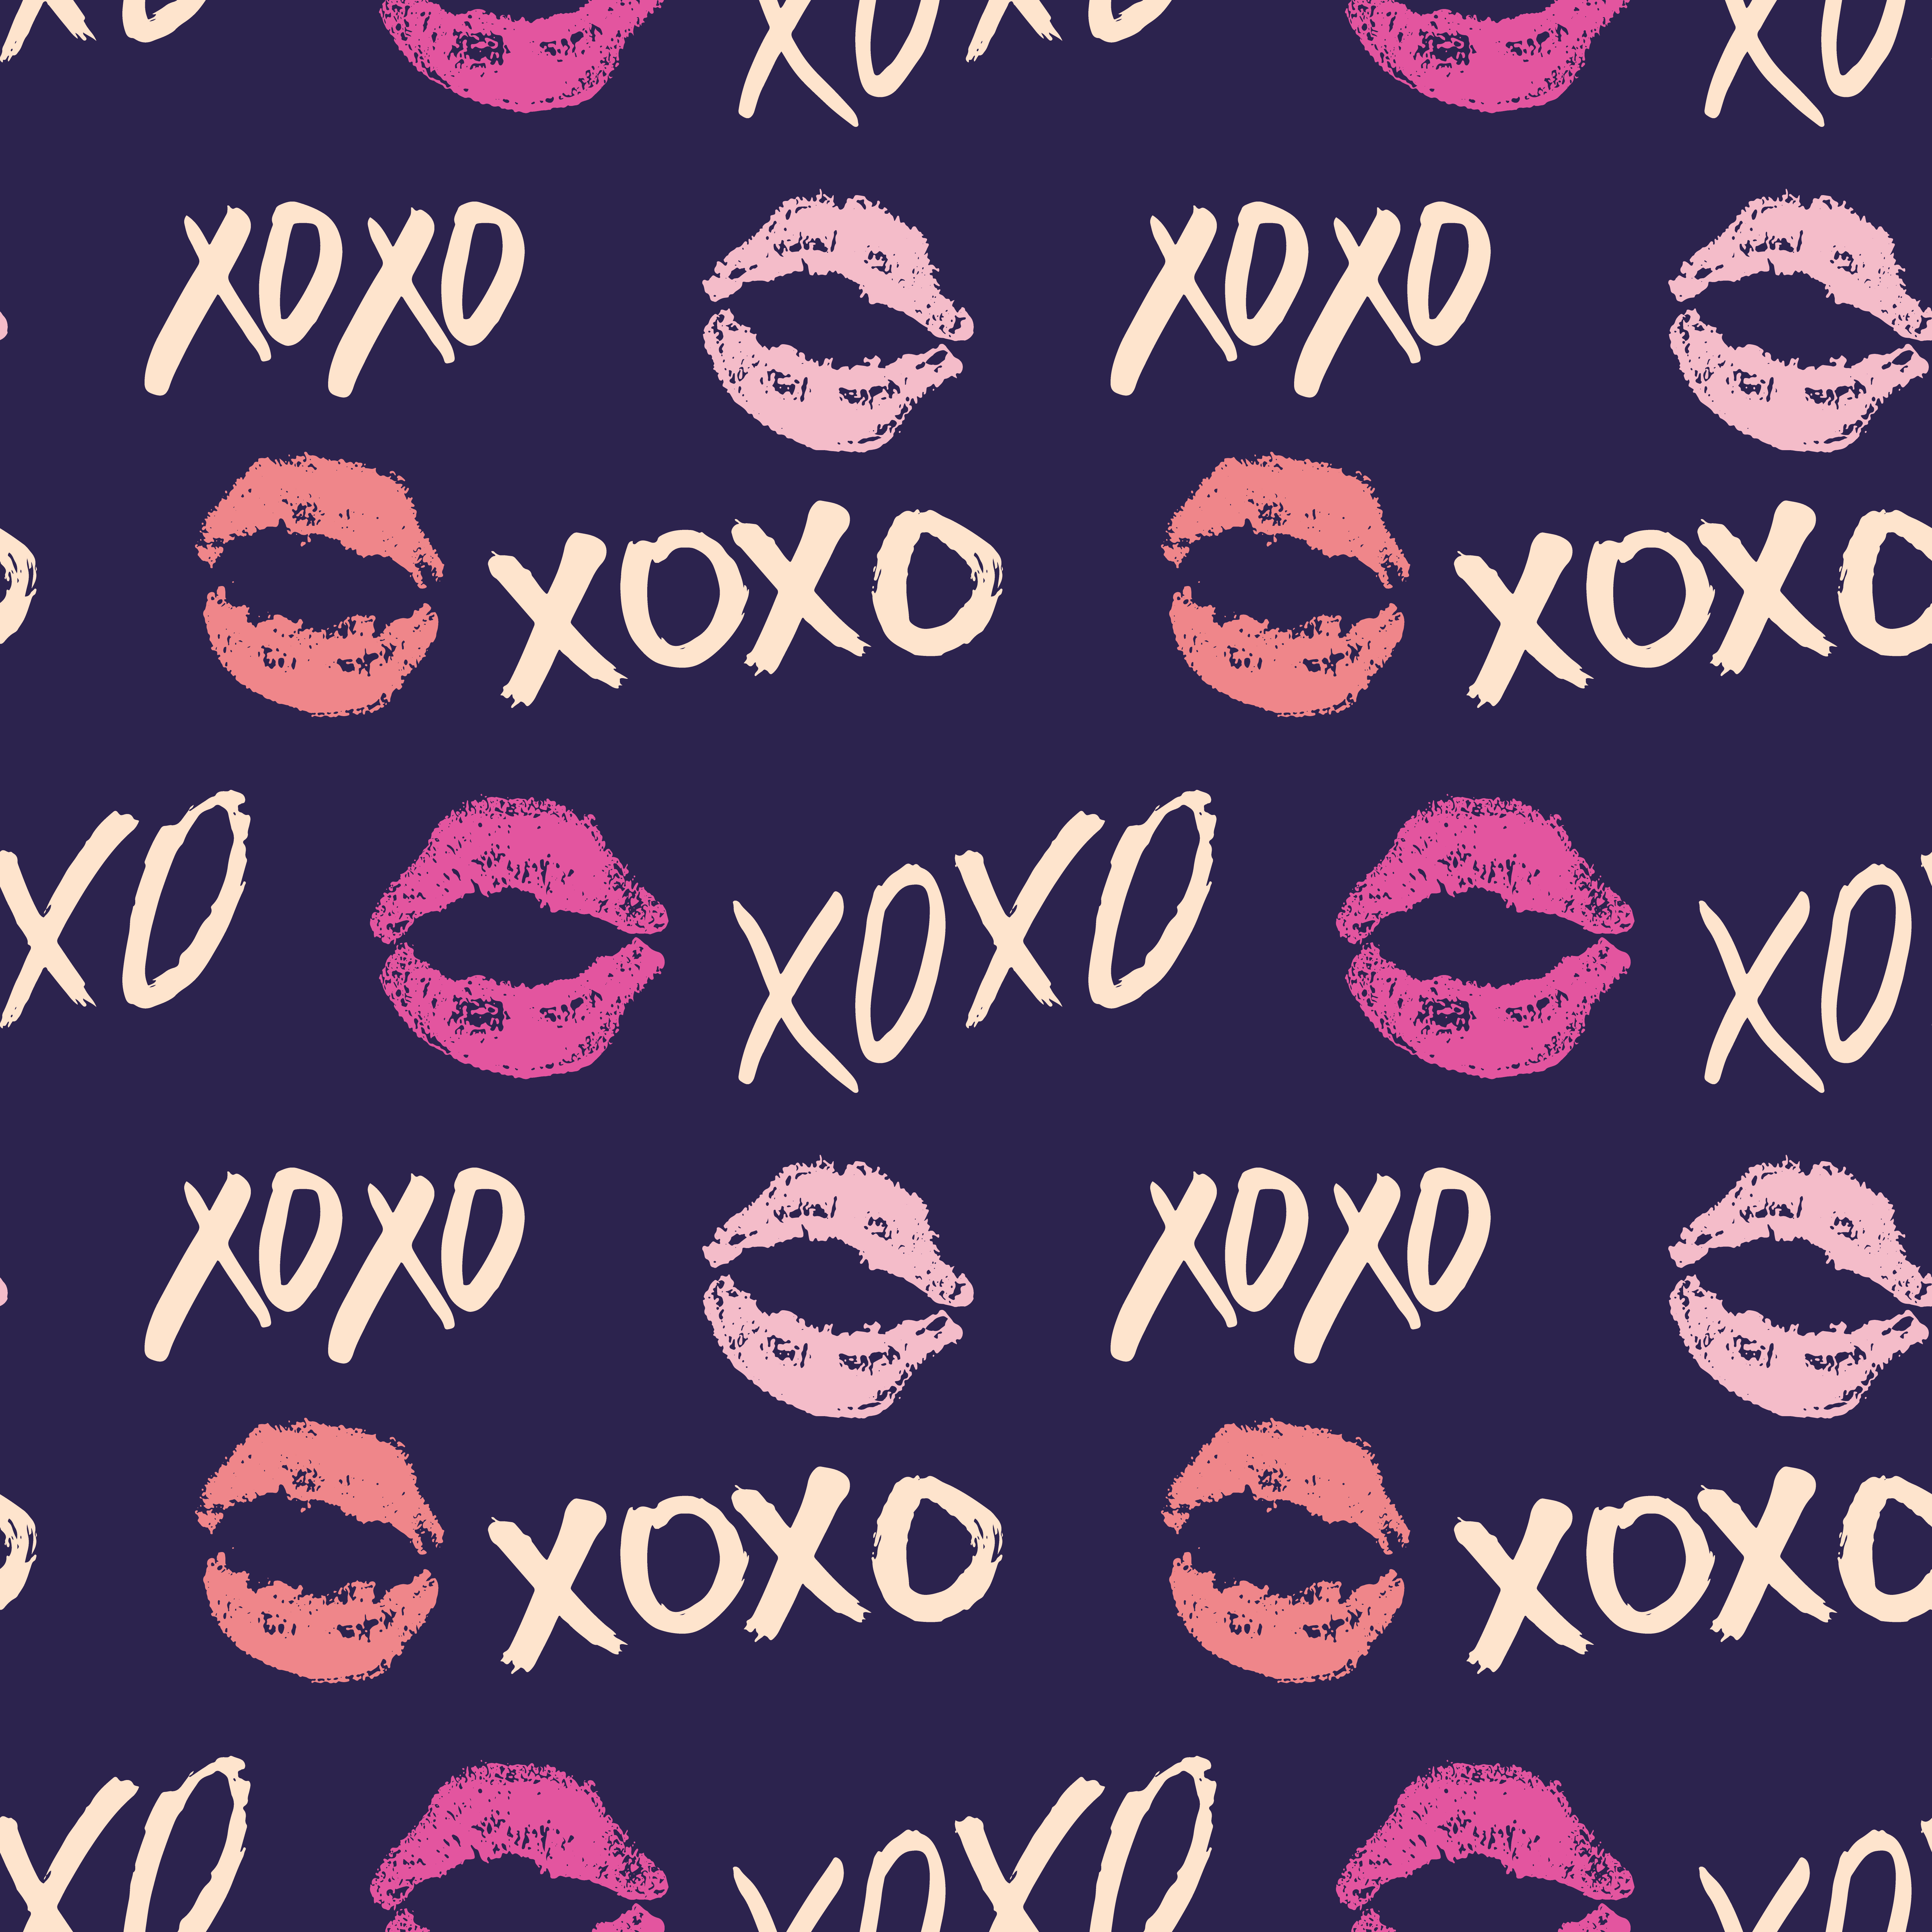 https://static.vecteezy.com/system/resources/previews/002/480/609/original/xoxo-brush-lettering-signs-seamless-pattern-grunge-calligraphic-hugs-and-kisses-phrase-internet-slang-abbreviation-xoxo-symbols-illustration-isolated-on-white-background-vector.jpg